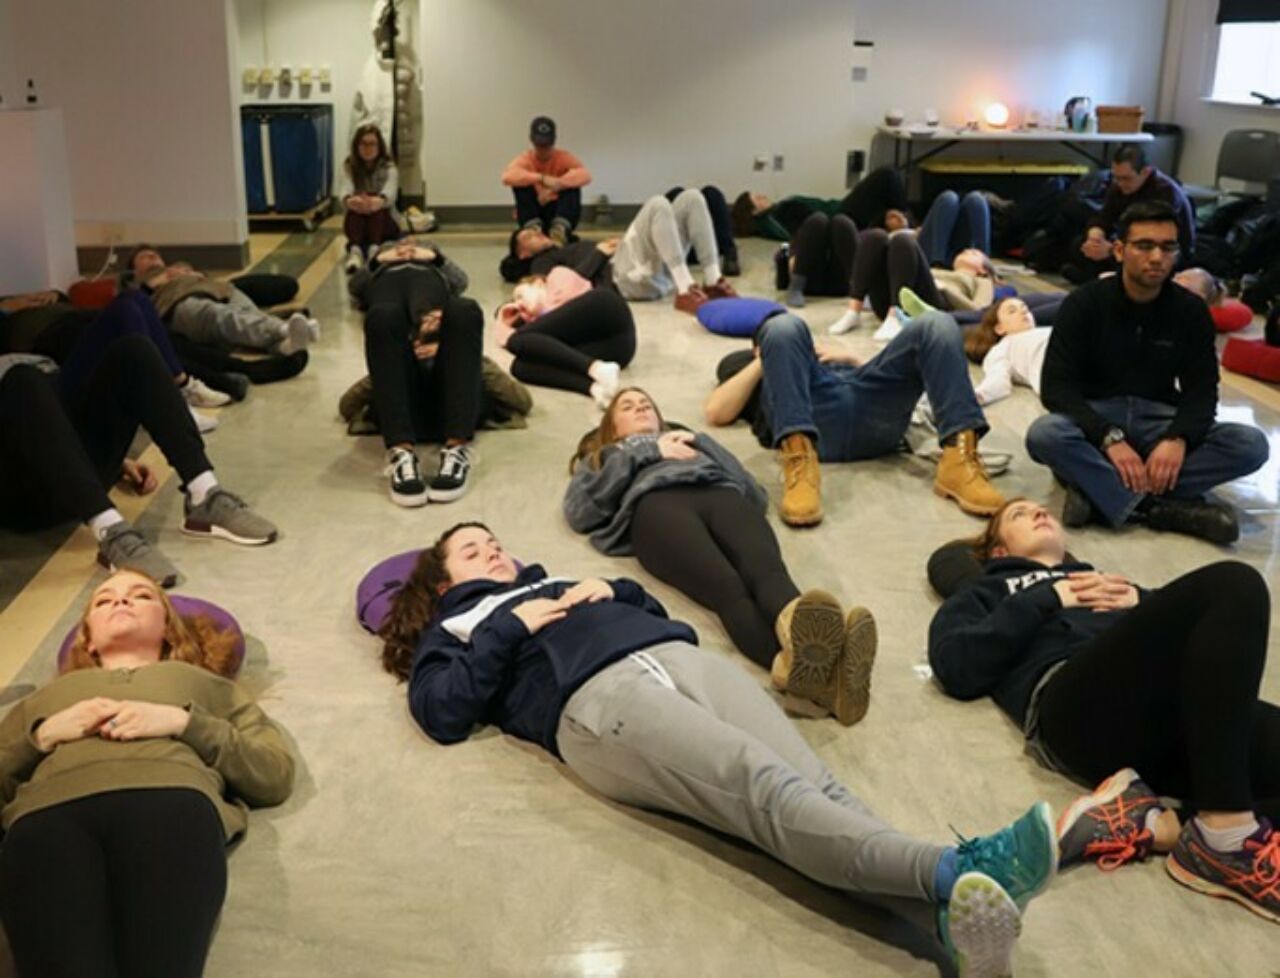 An array of students lying peacefully on the floor participating in a Zen Den Mindfulness exercise.